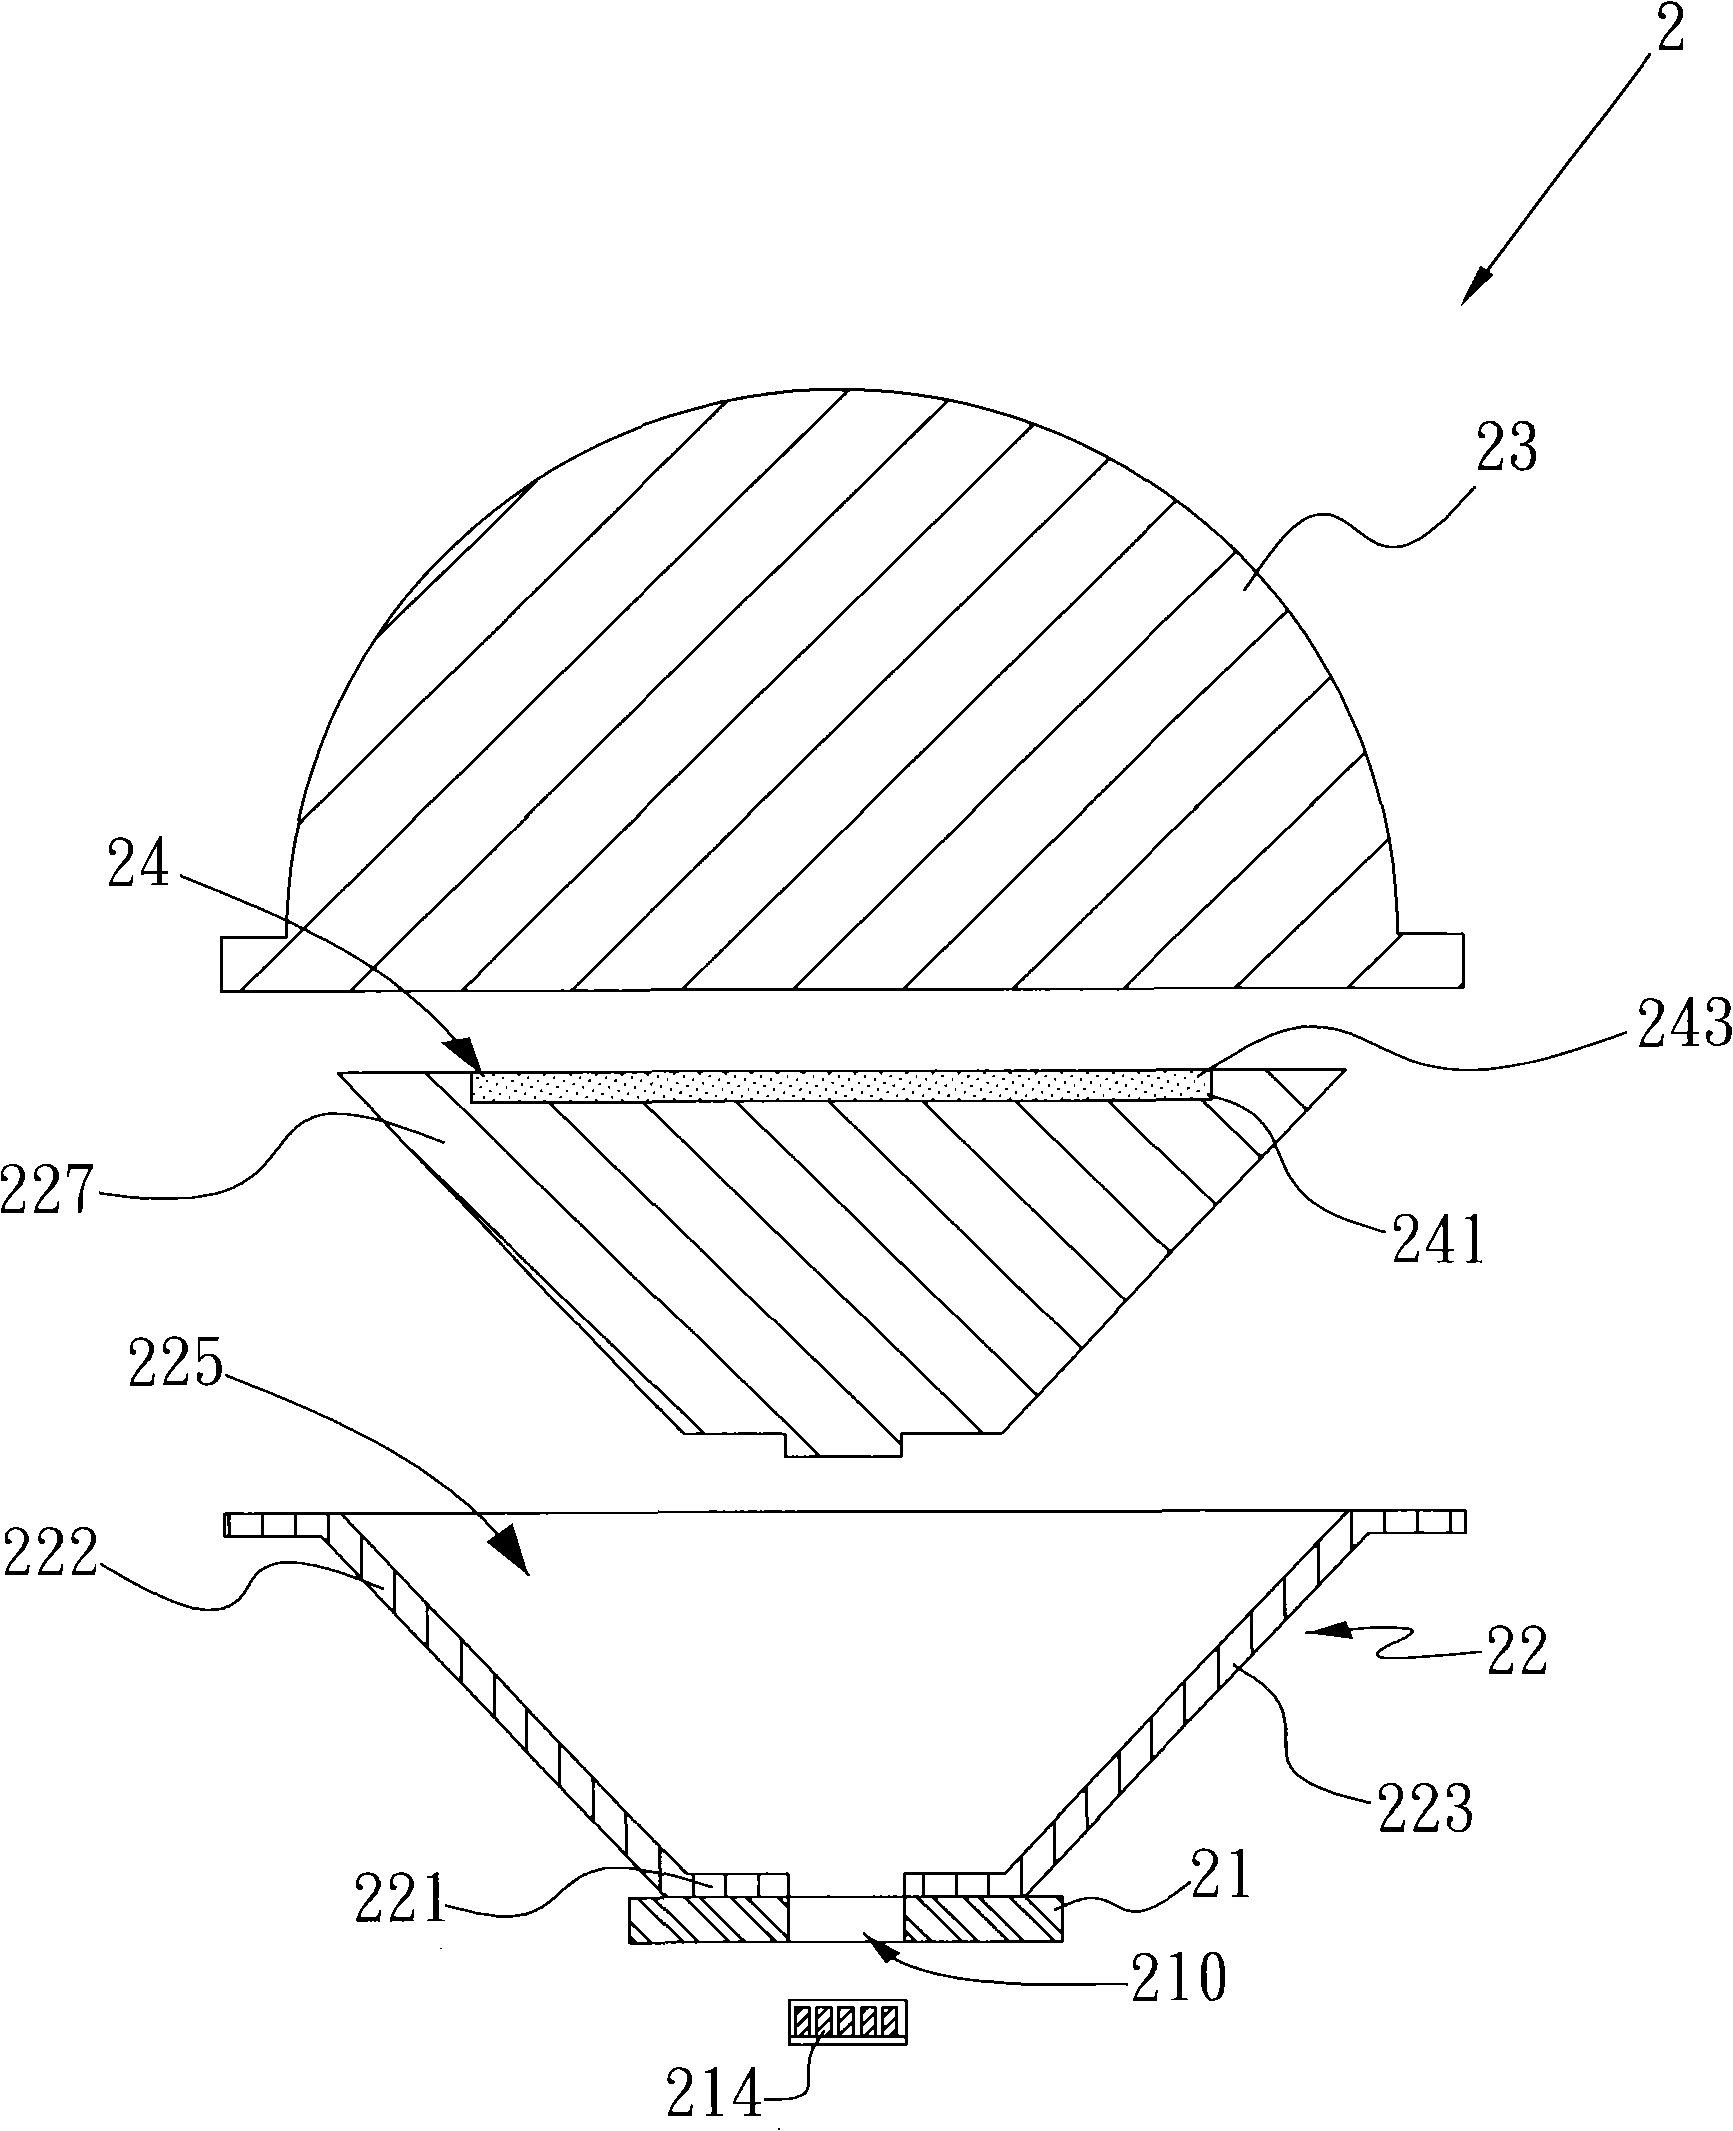 Improvement of light-emitting diode (LED) module and lighting fixture structure